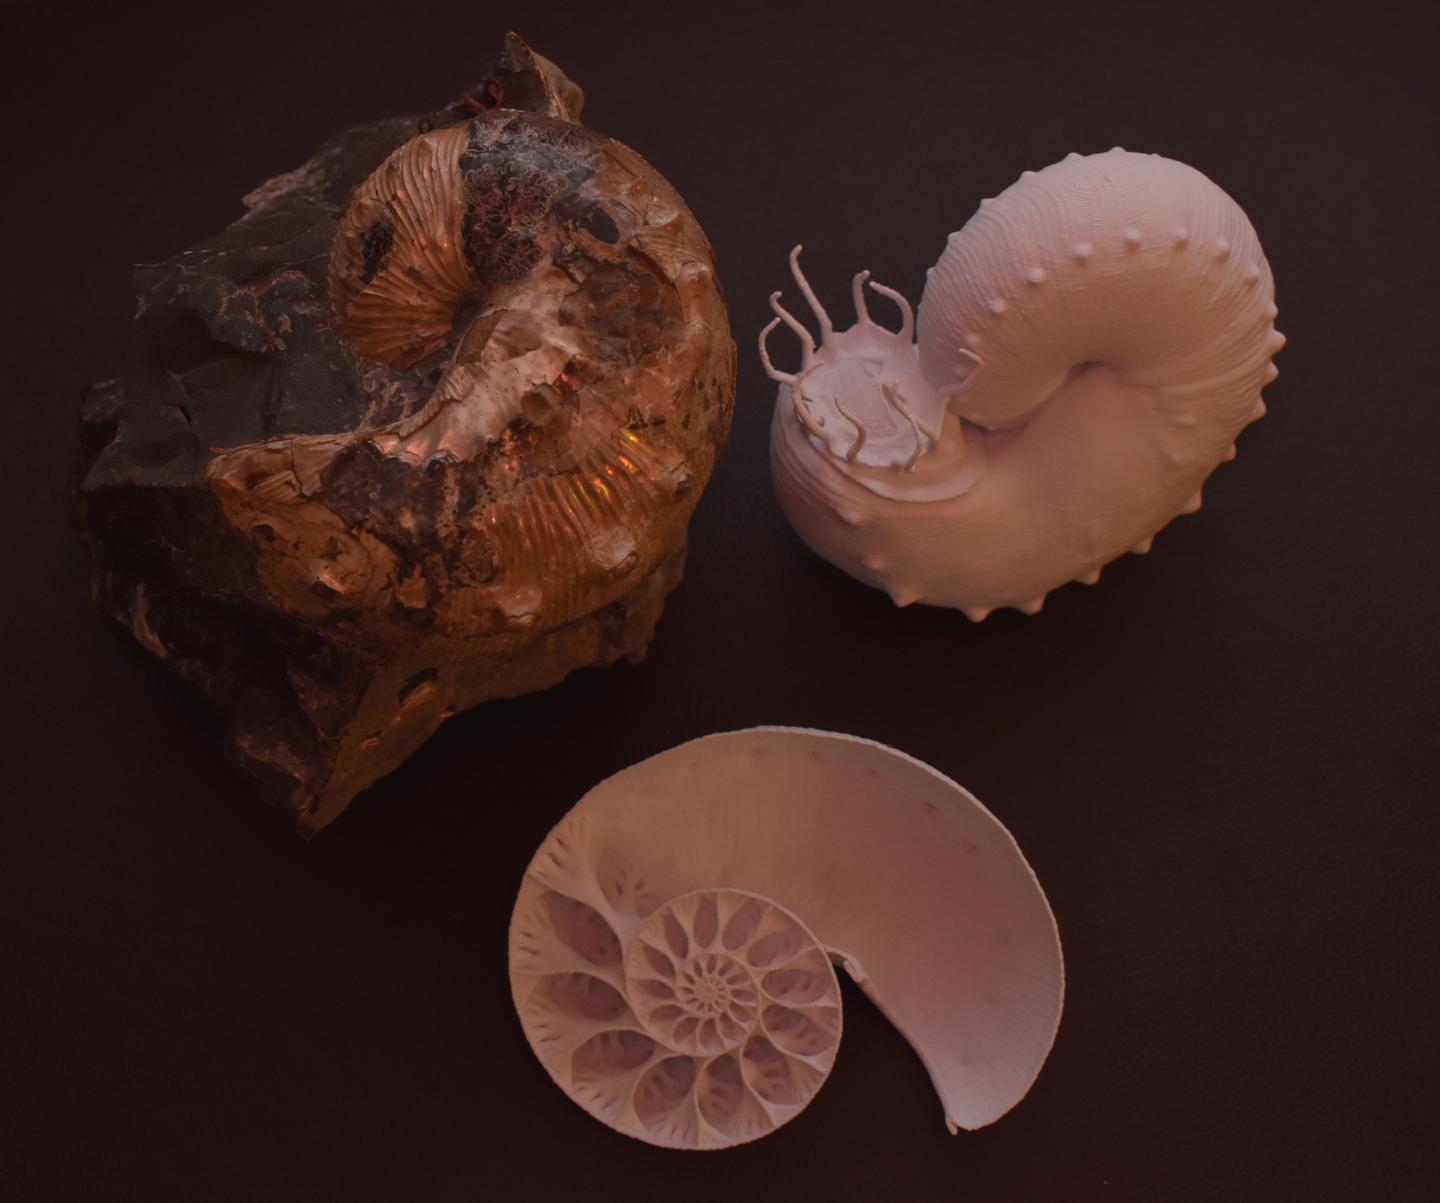 Fossil ammonite along with 3D-printed computer reconstructions showing internal and external morphology. (Image: David Peterman)